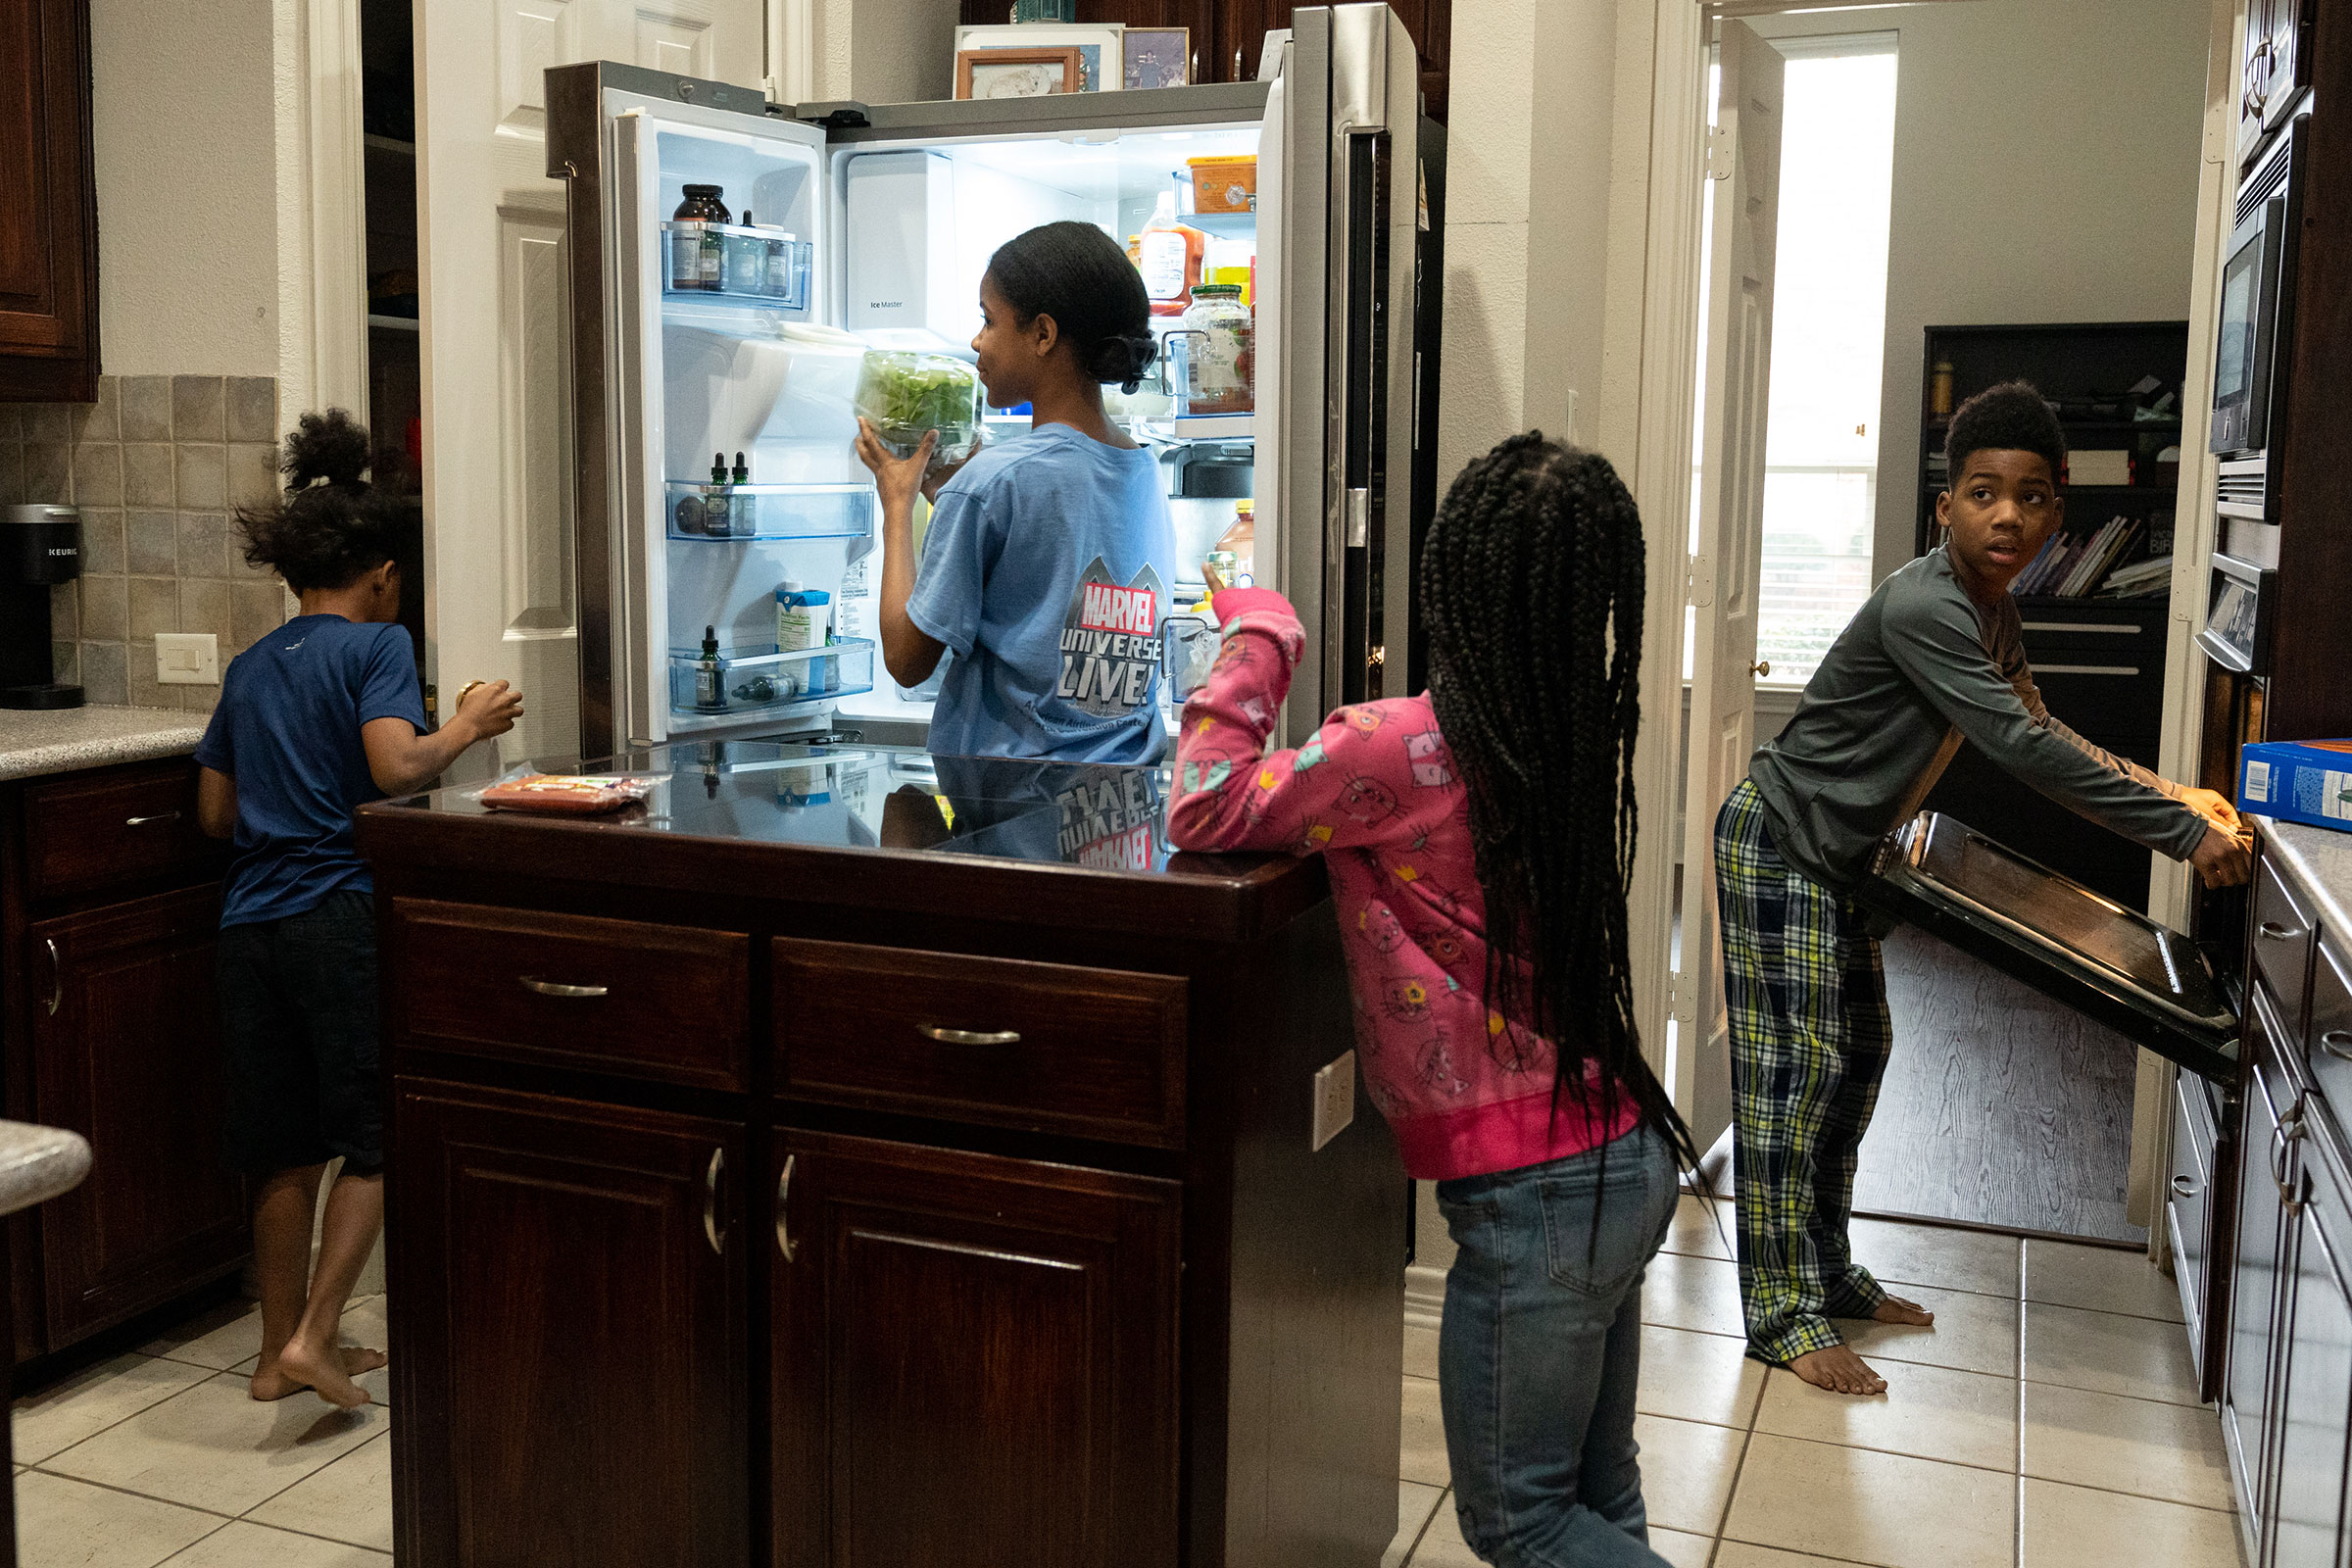 RICHARDSON, TEXAS - February 23, 2022: Four of the Thomas siblings make lunch after school lessons in the family's kitchen. Ilana Panich-Linsman for TIME